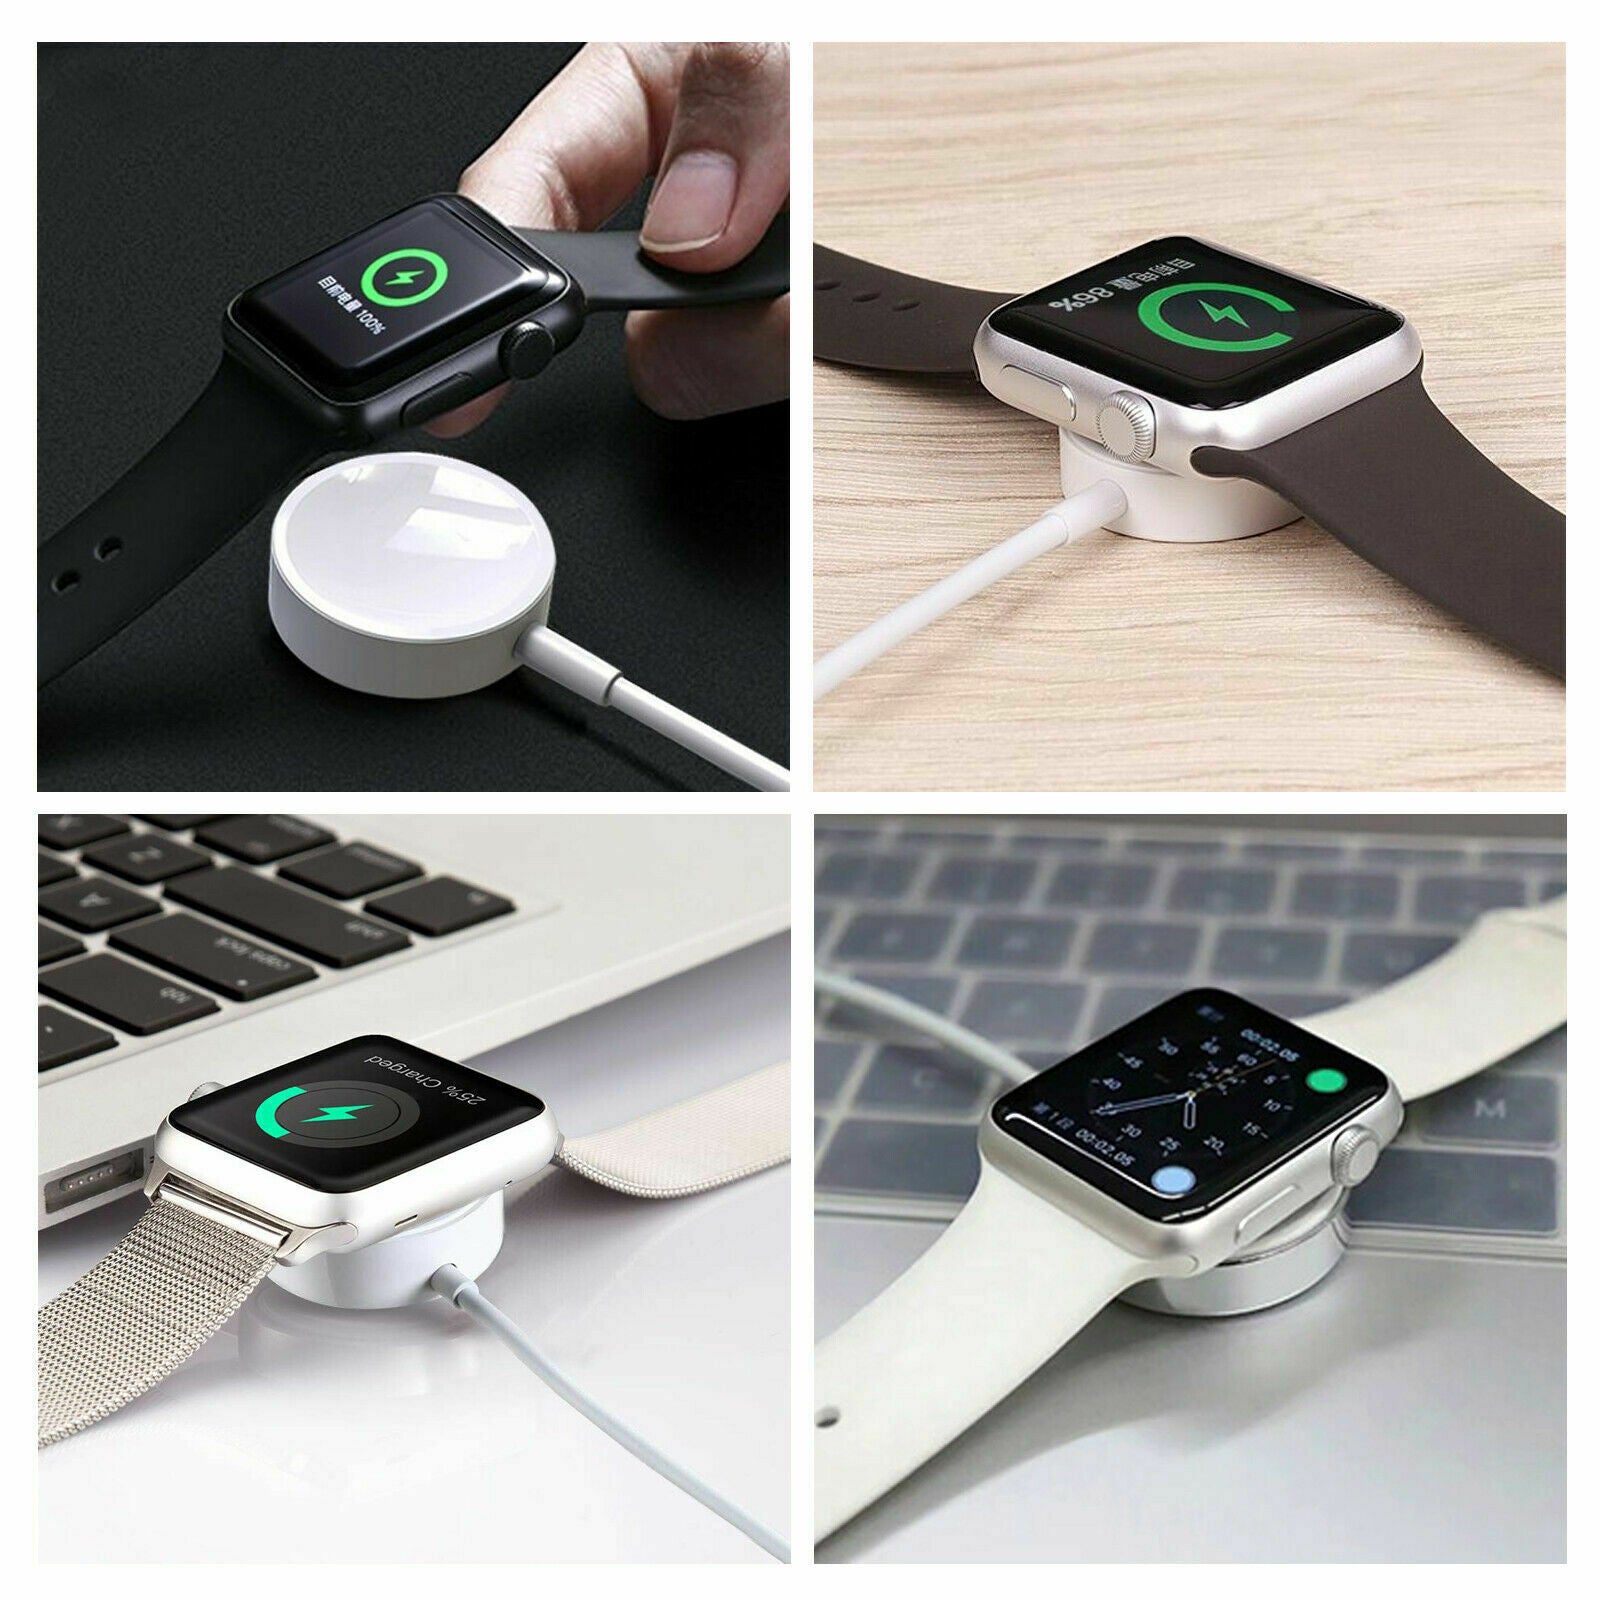 Magnetic Charging Cable for Apple Watch